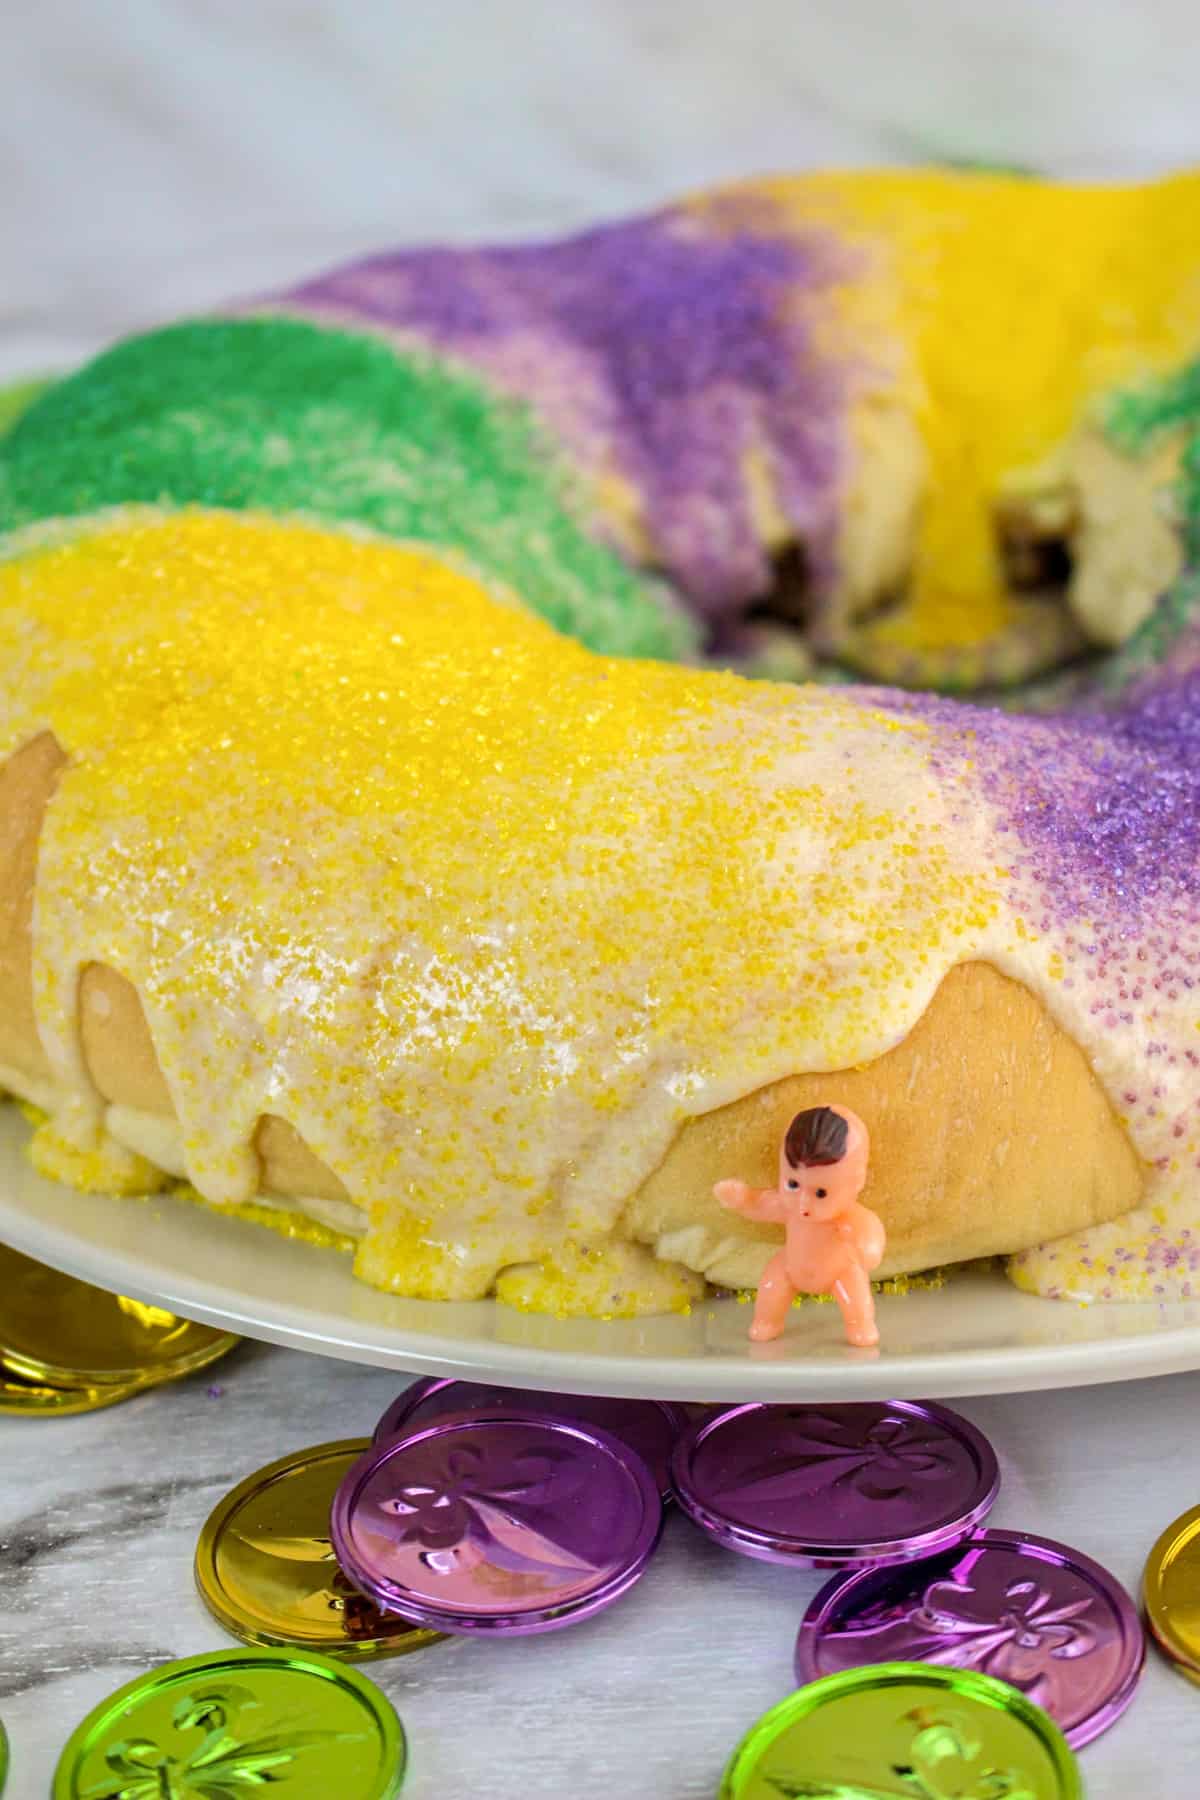 Easy homemade king cake with vanilla glaze and decorated with purple, green, and yellow sanding sugar. A small plastic baby in one the white platter next to the cake.